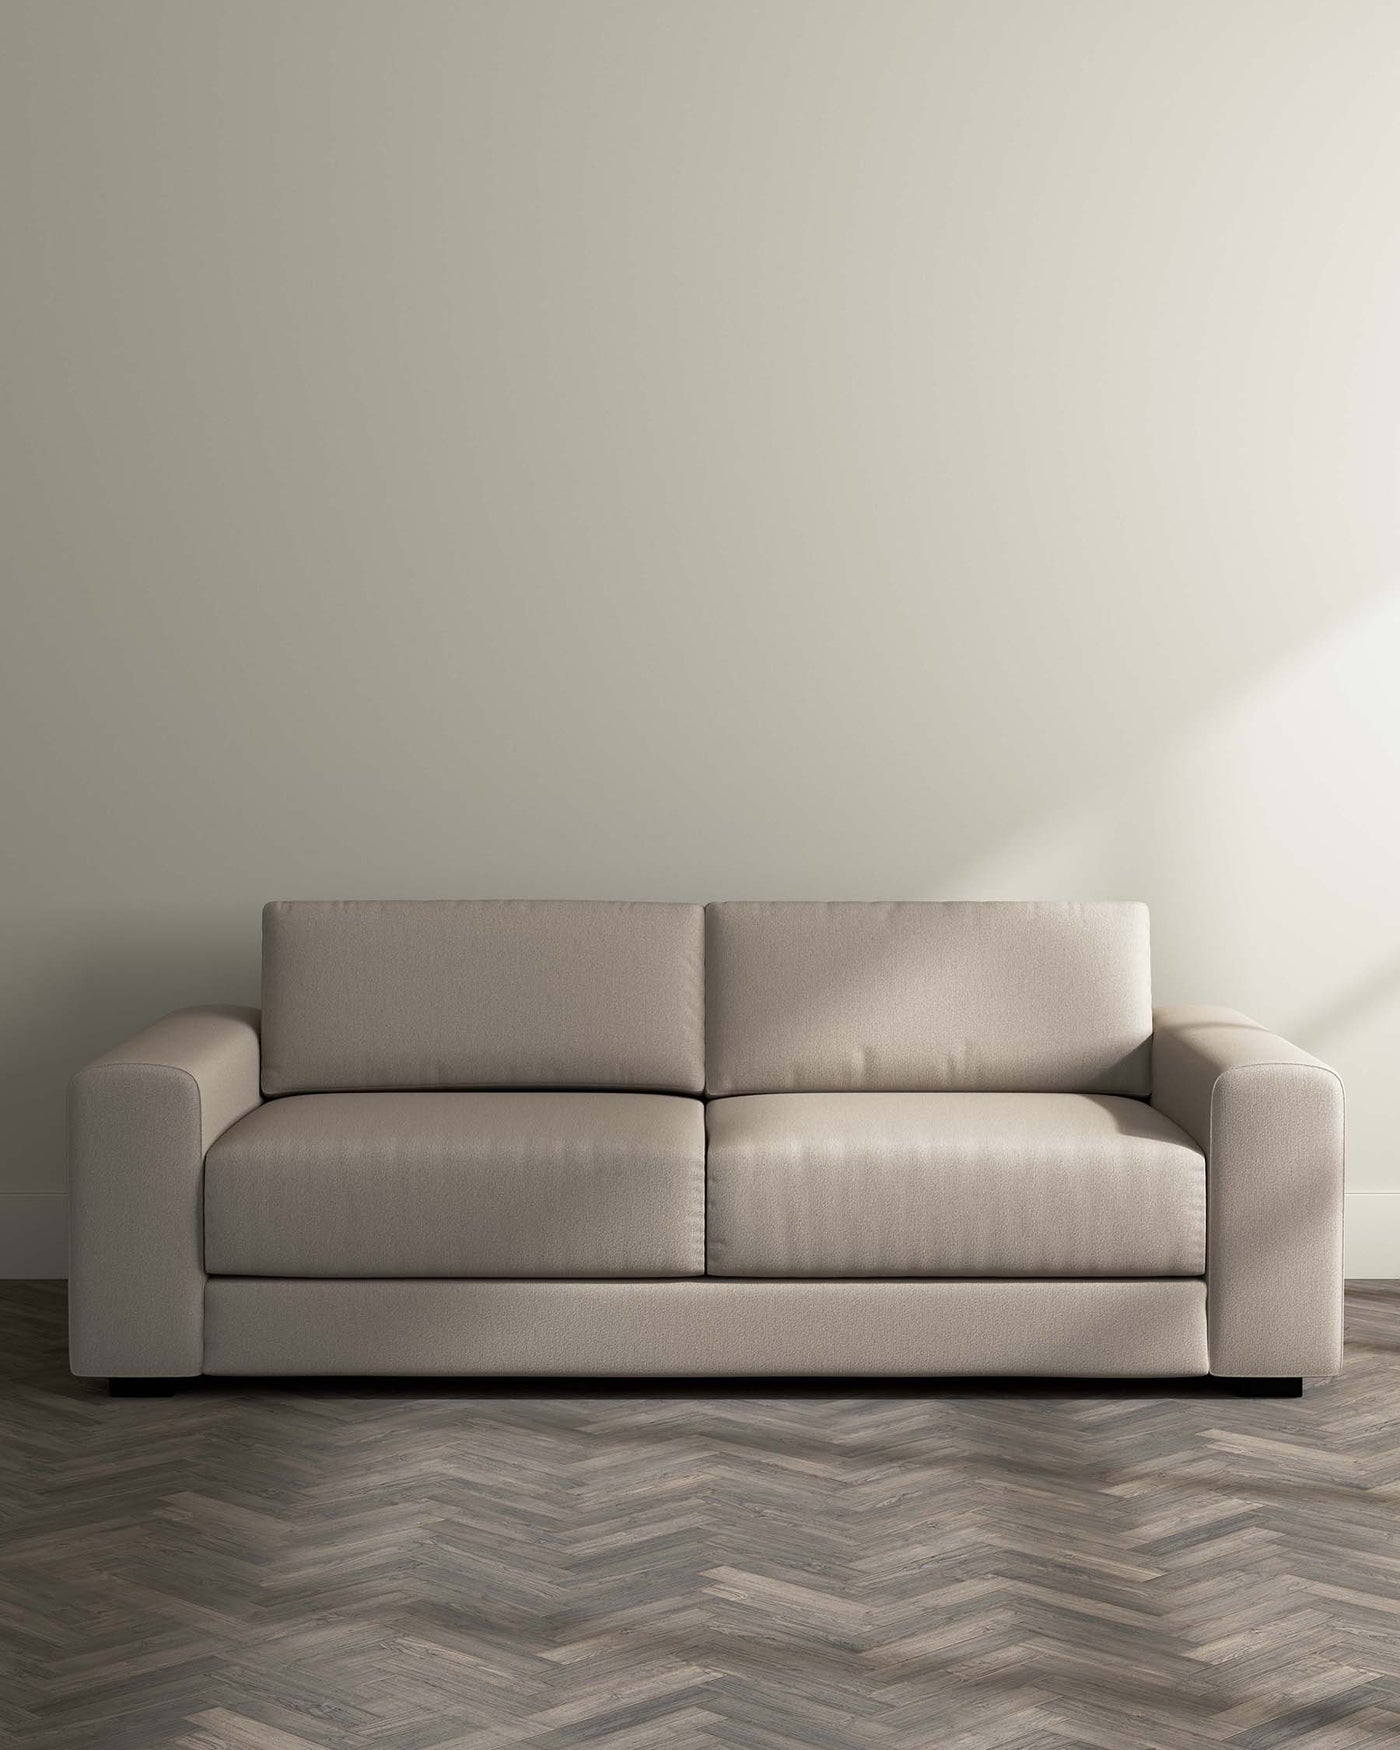 Modern minimalist beige three-seater sofa with clean lines and a smooth fabric finish, placed against a light neutral wall on a herringbone patterned wooden floor.